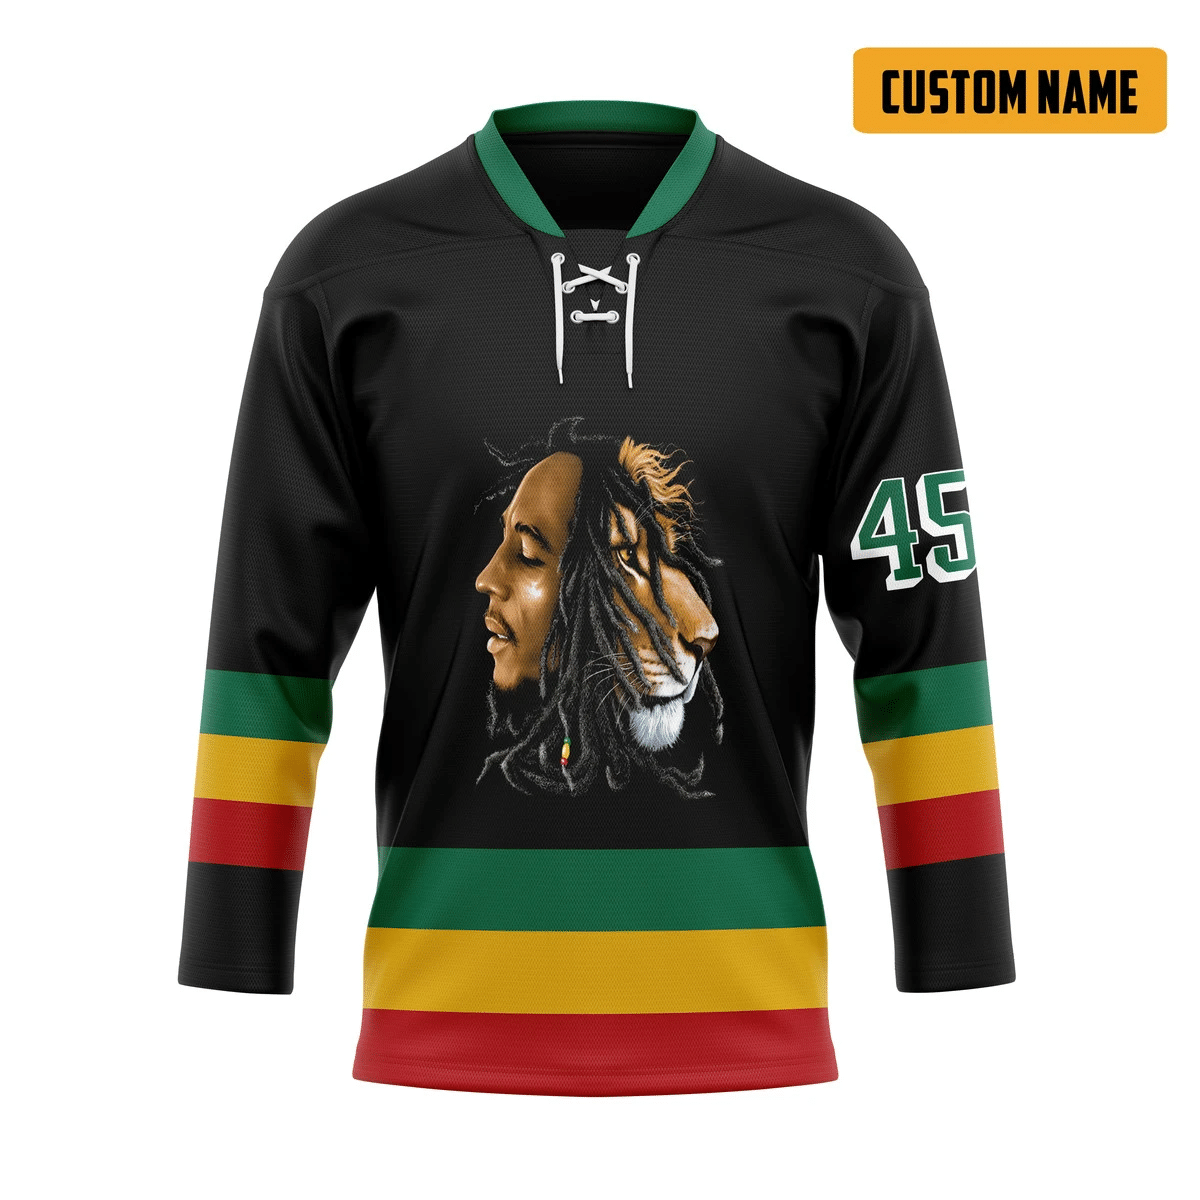 Top cool Hockey jersey for fan You can buy online. 83